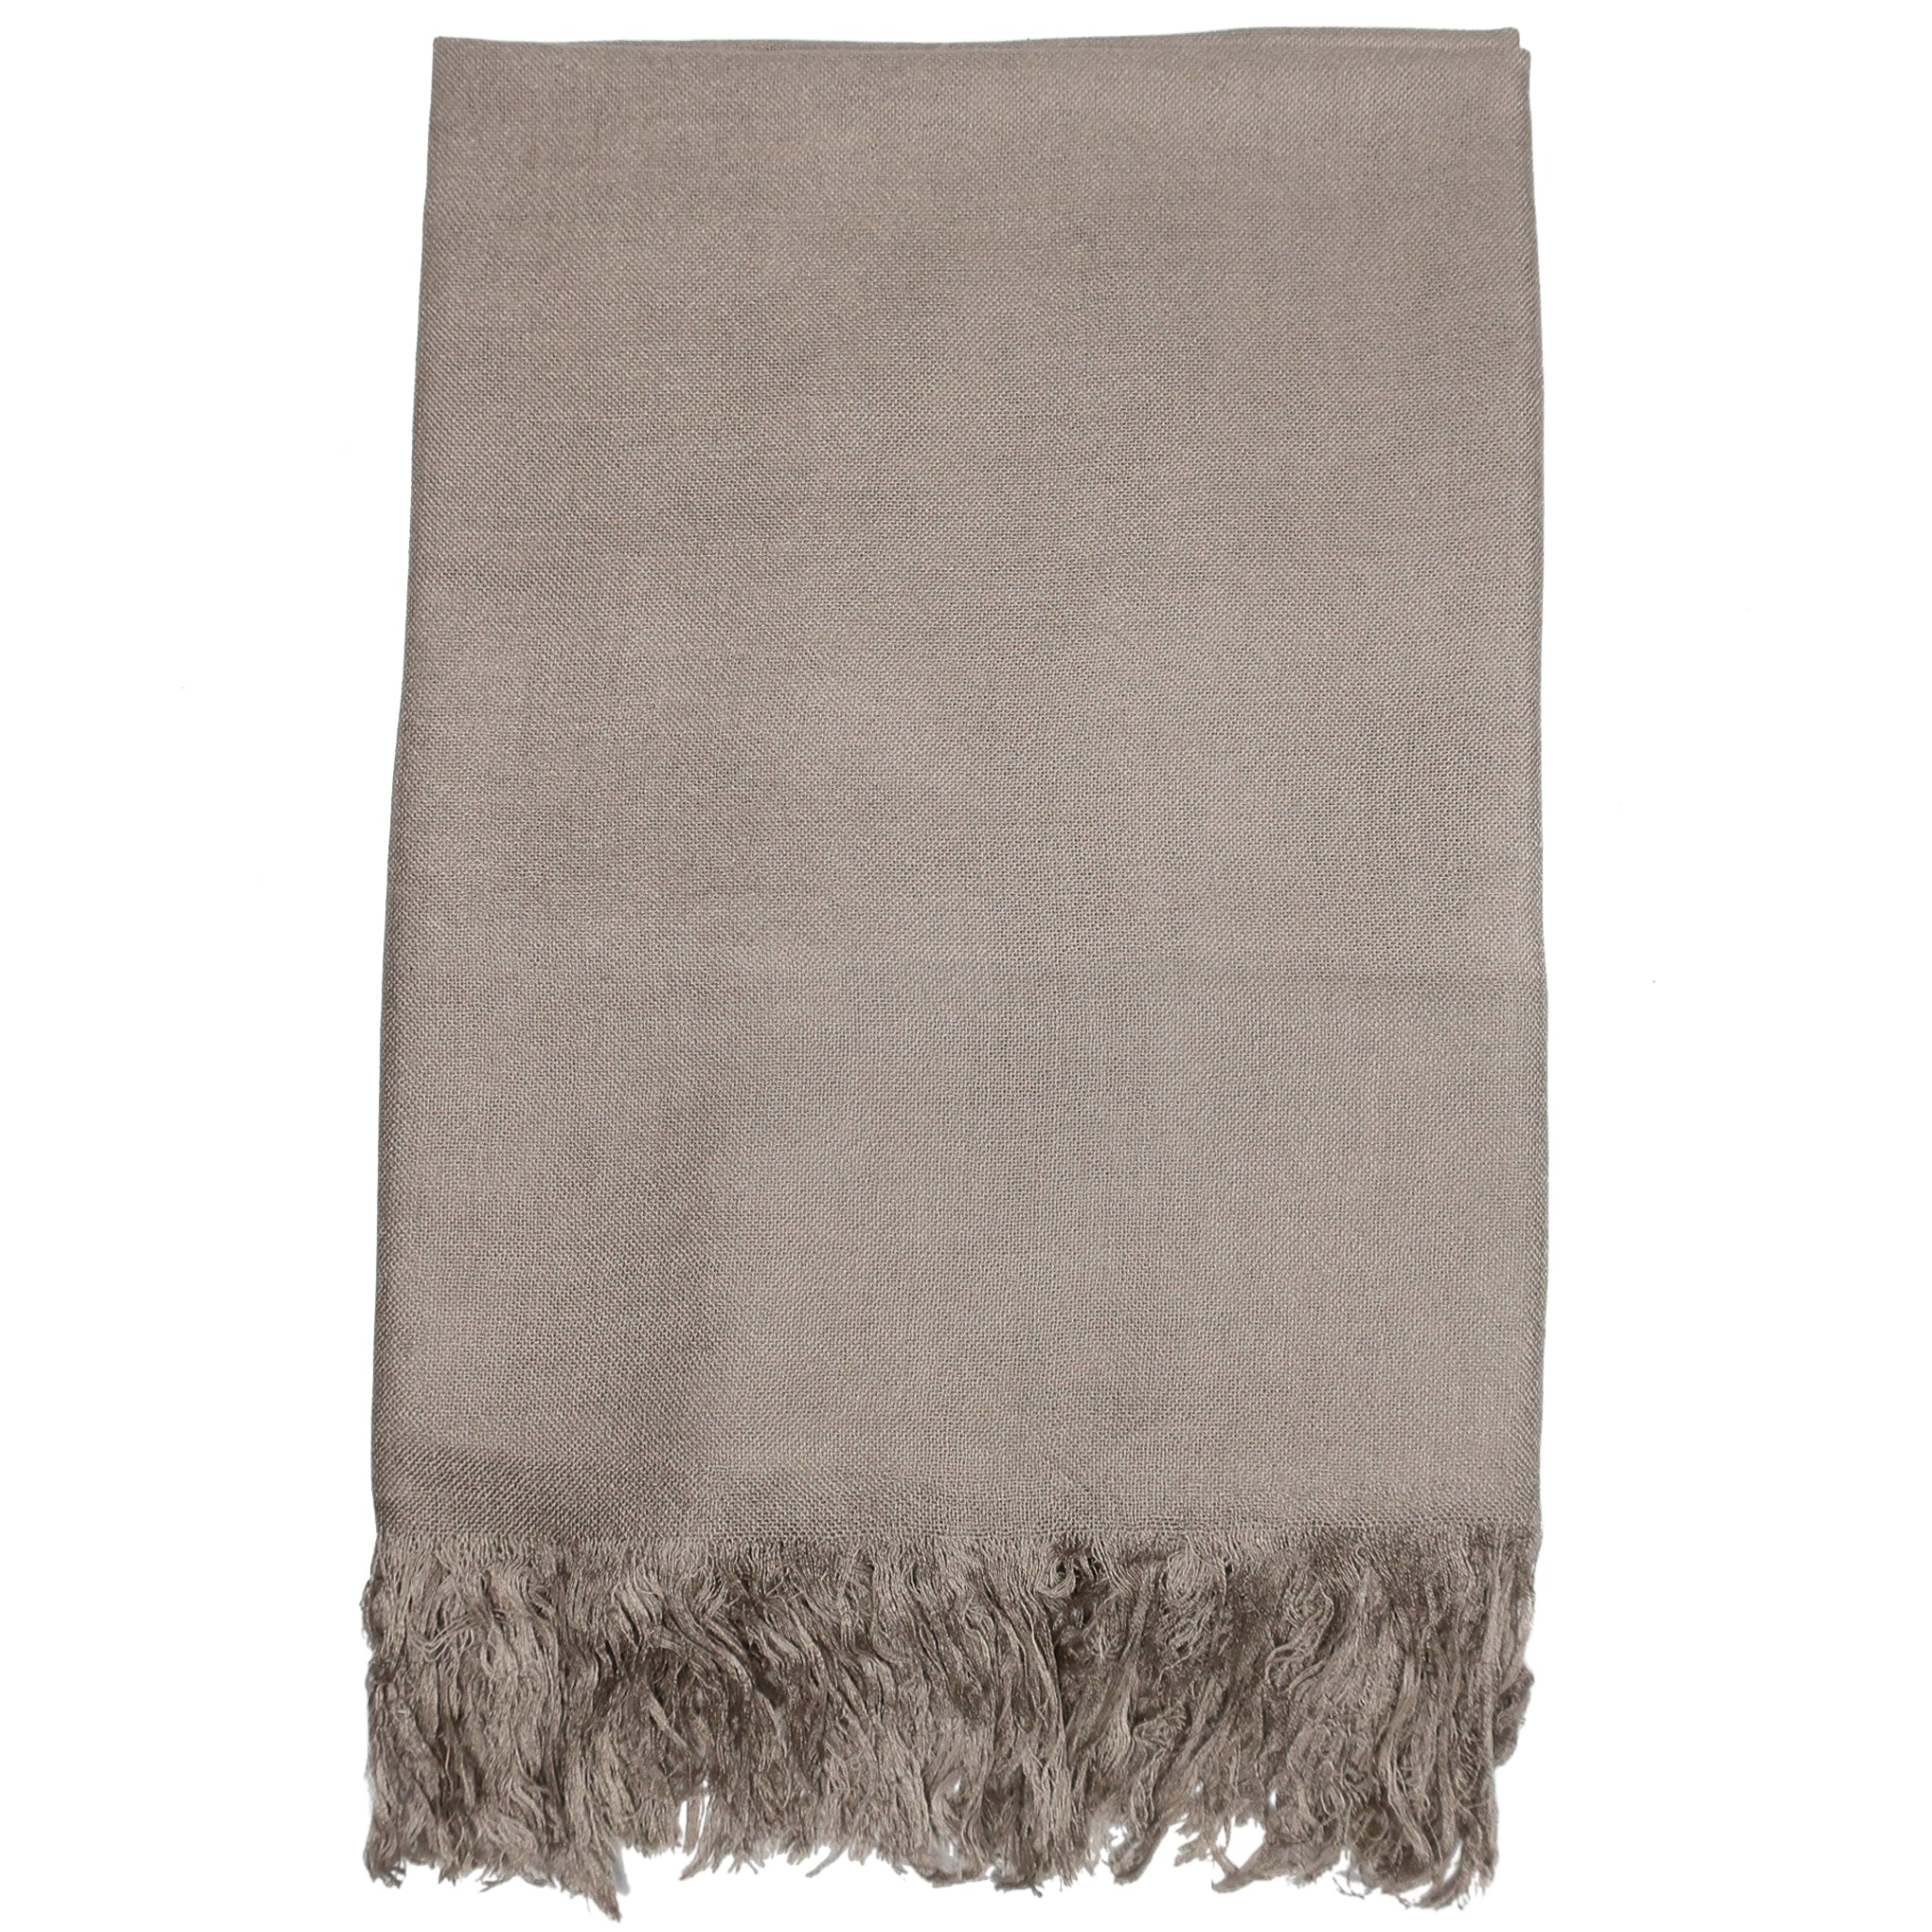 Blue Pacific Tissue Solid Modal and Cashmere Scarf Shawl in Khaki